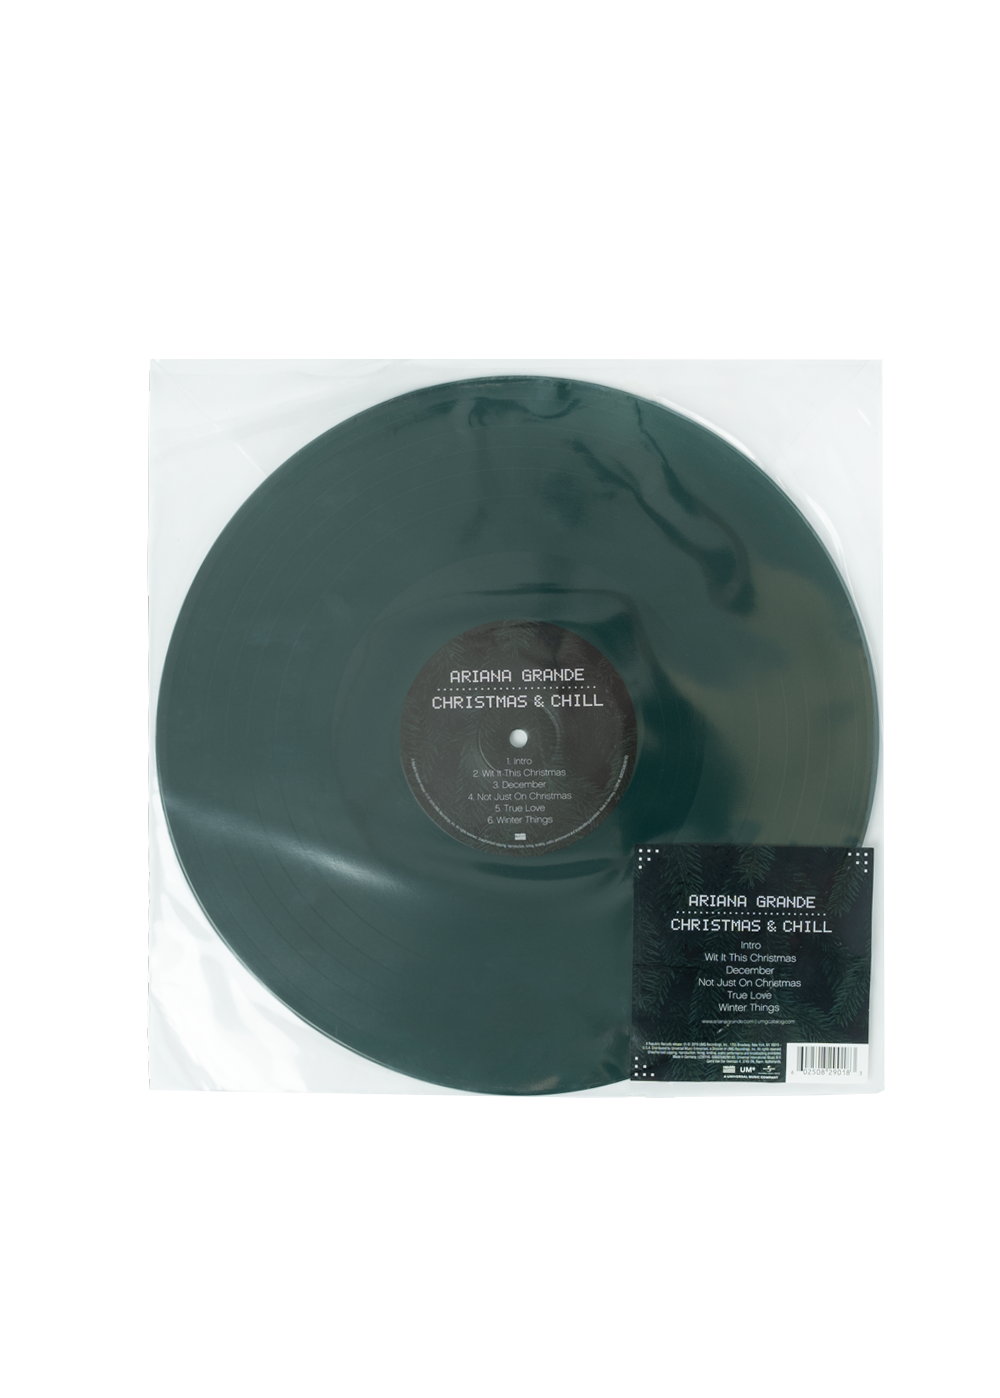 Ariana Grande - Christmas & Chill Vinilo (dark green with etching)